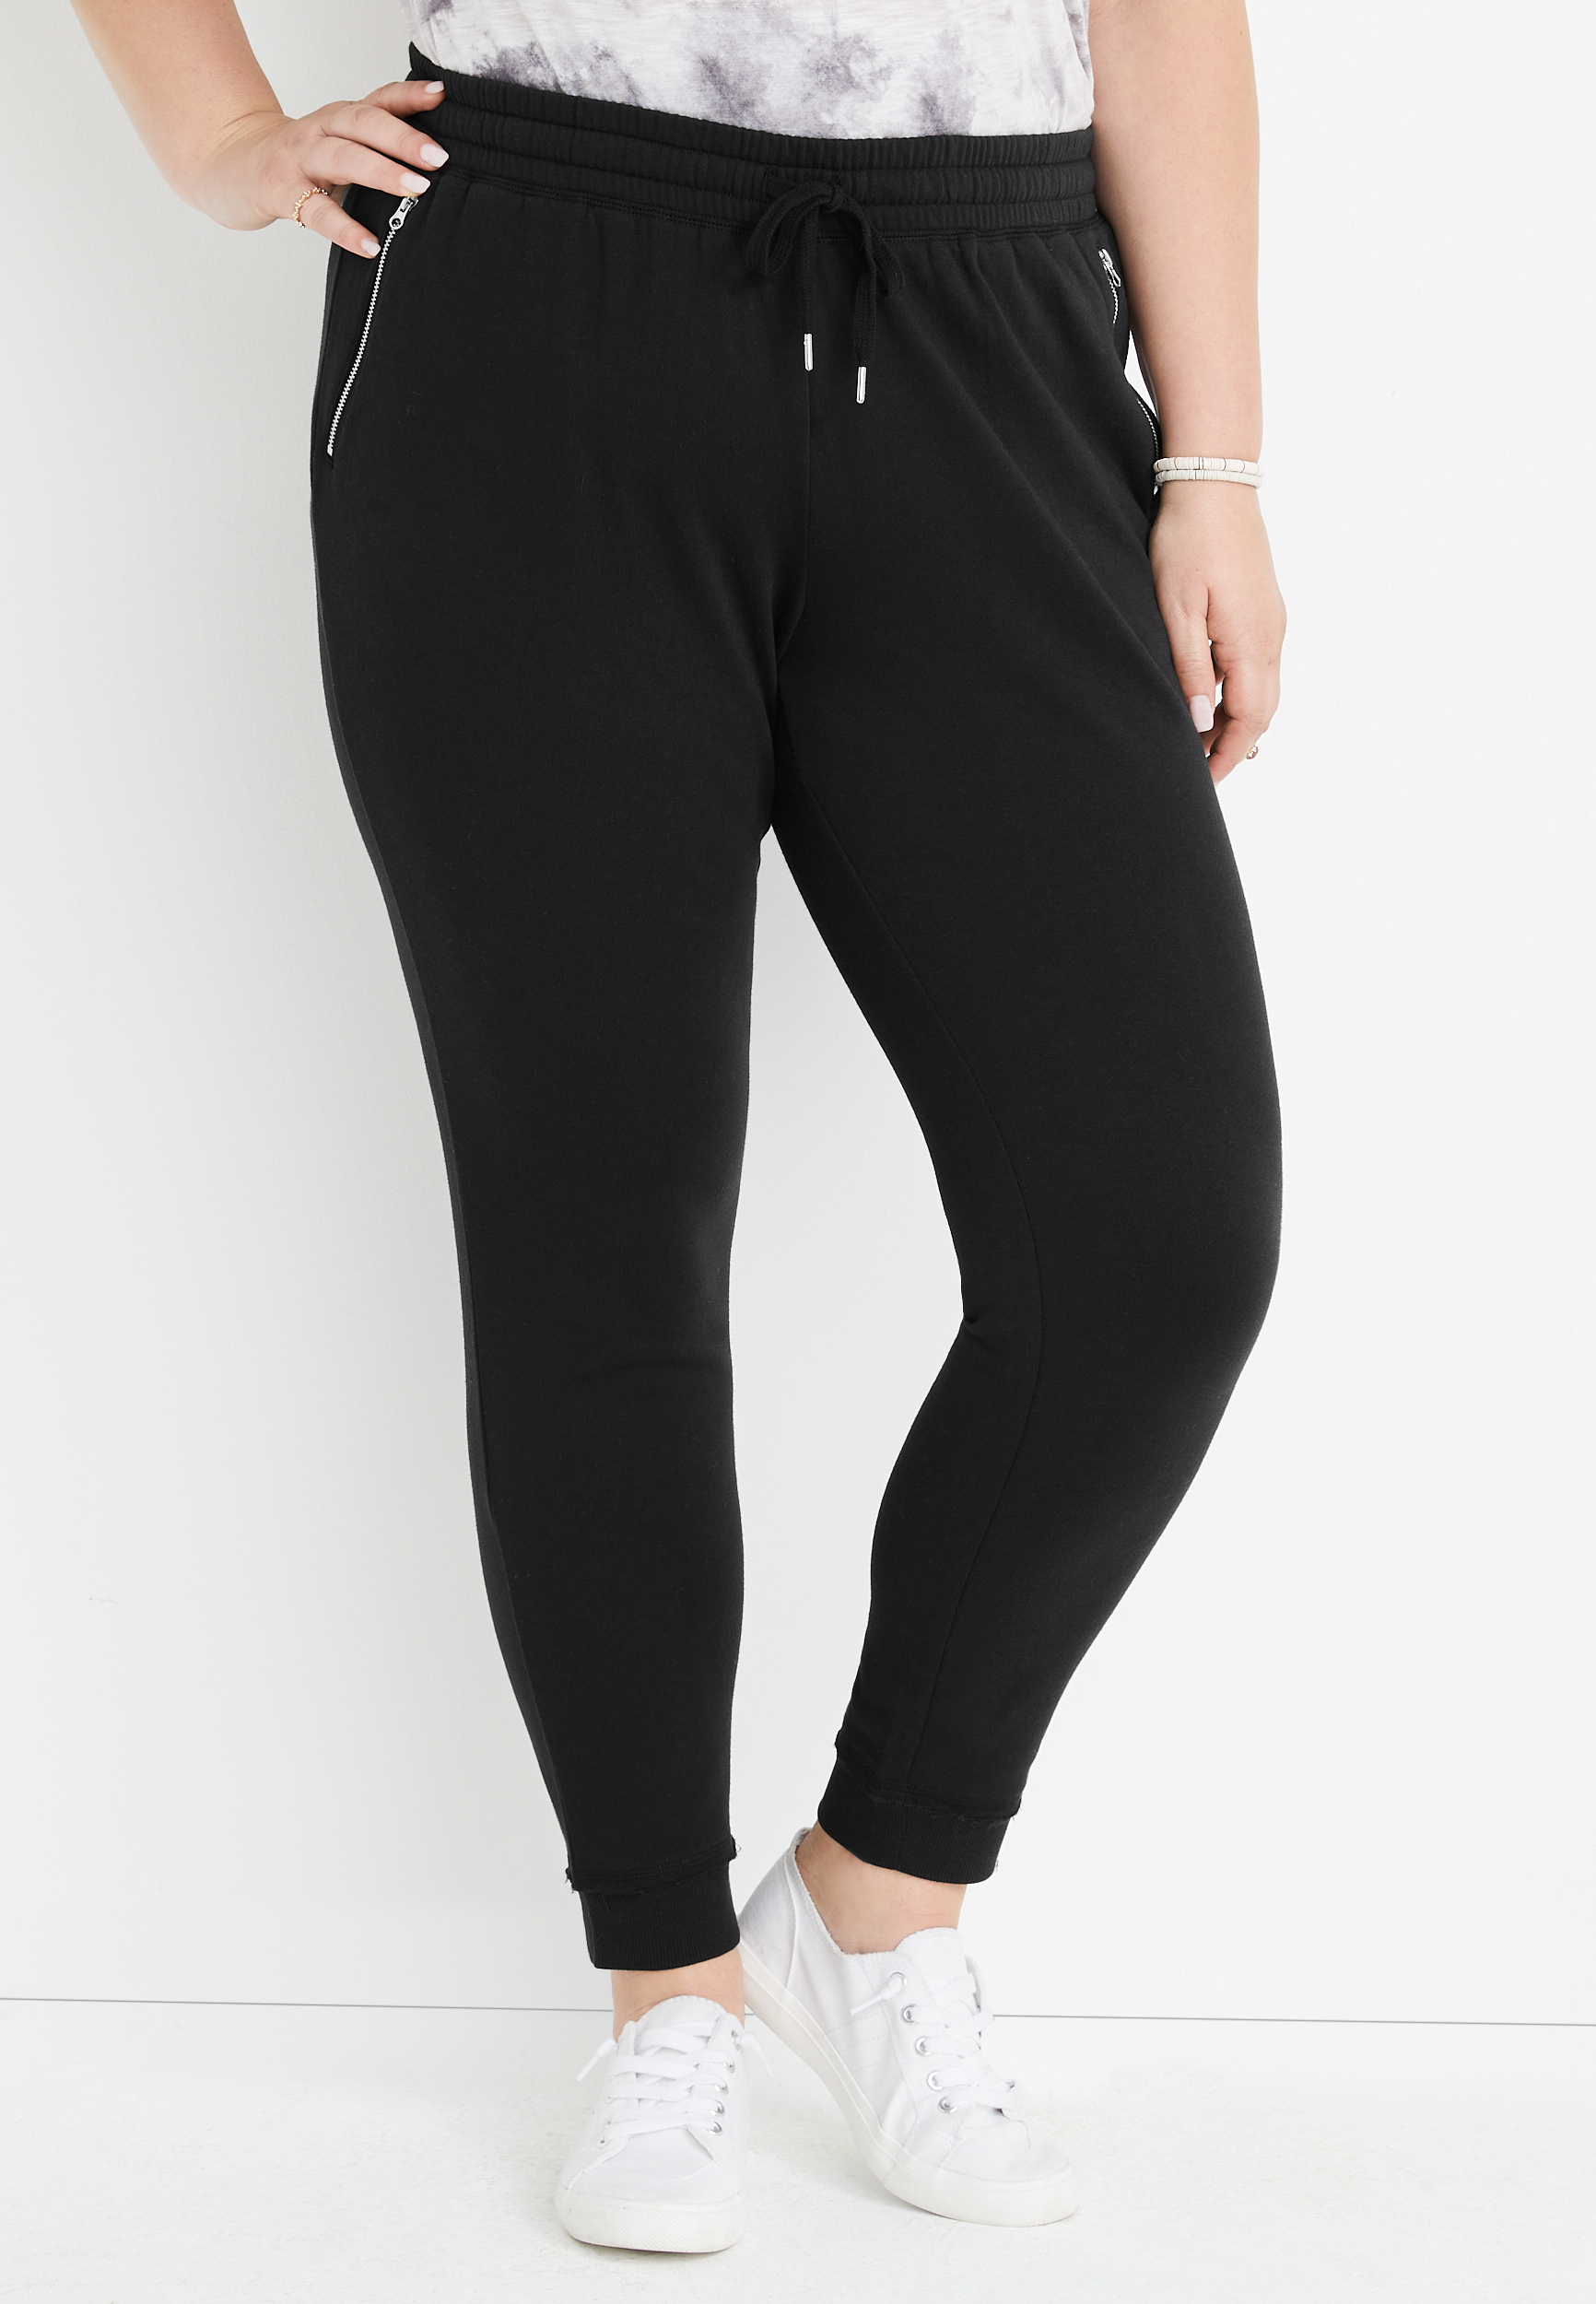 maurices Womens Zip Pocket Jogger